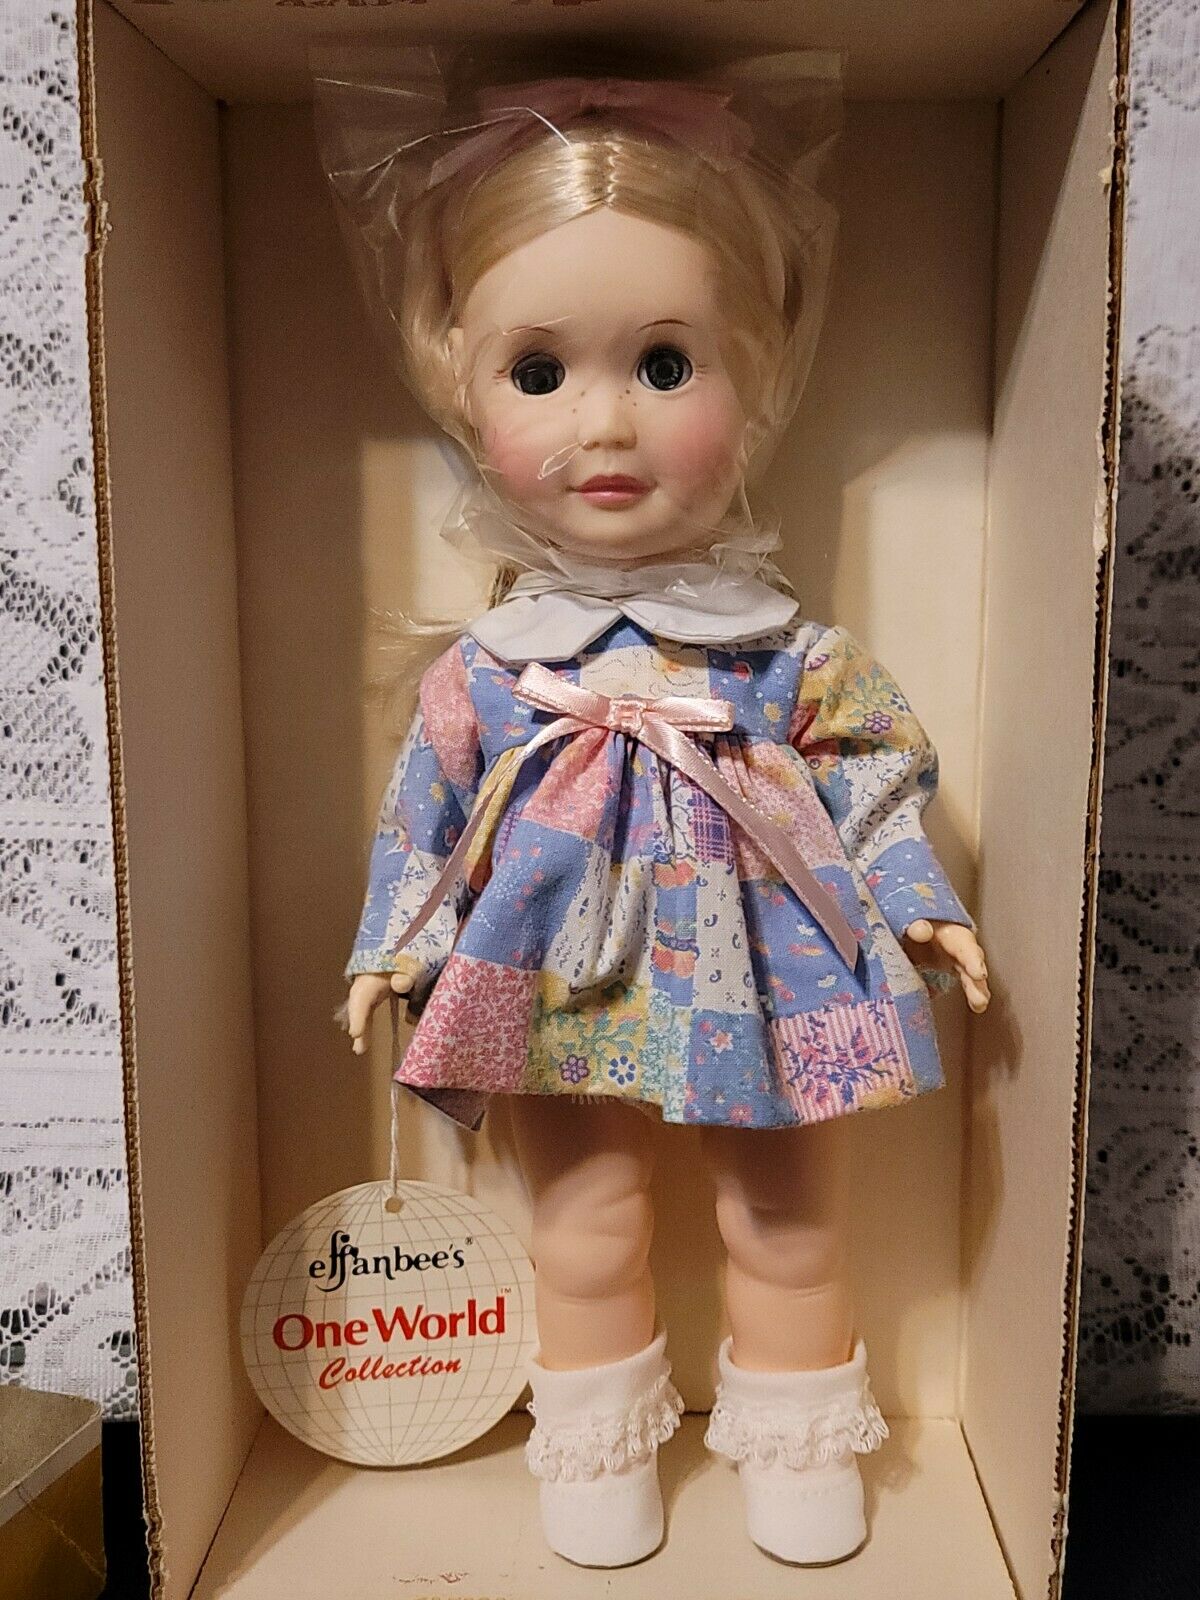 1983 Effanbee's One World Collection Doll - #1410 Jane - New In Original Box